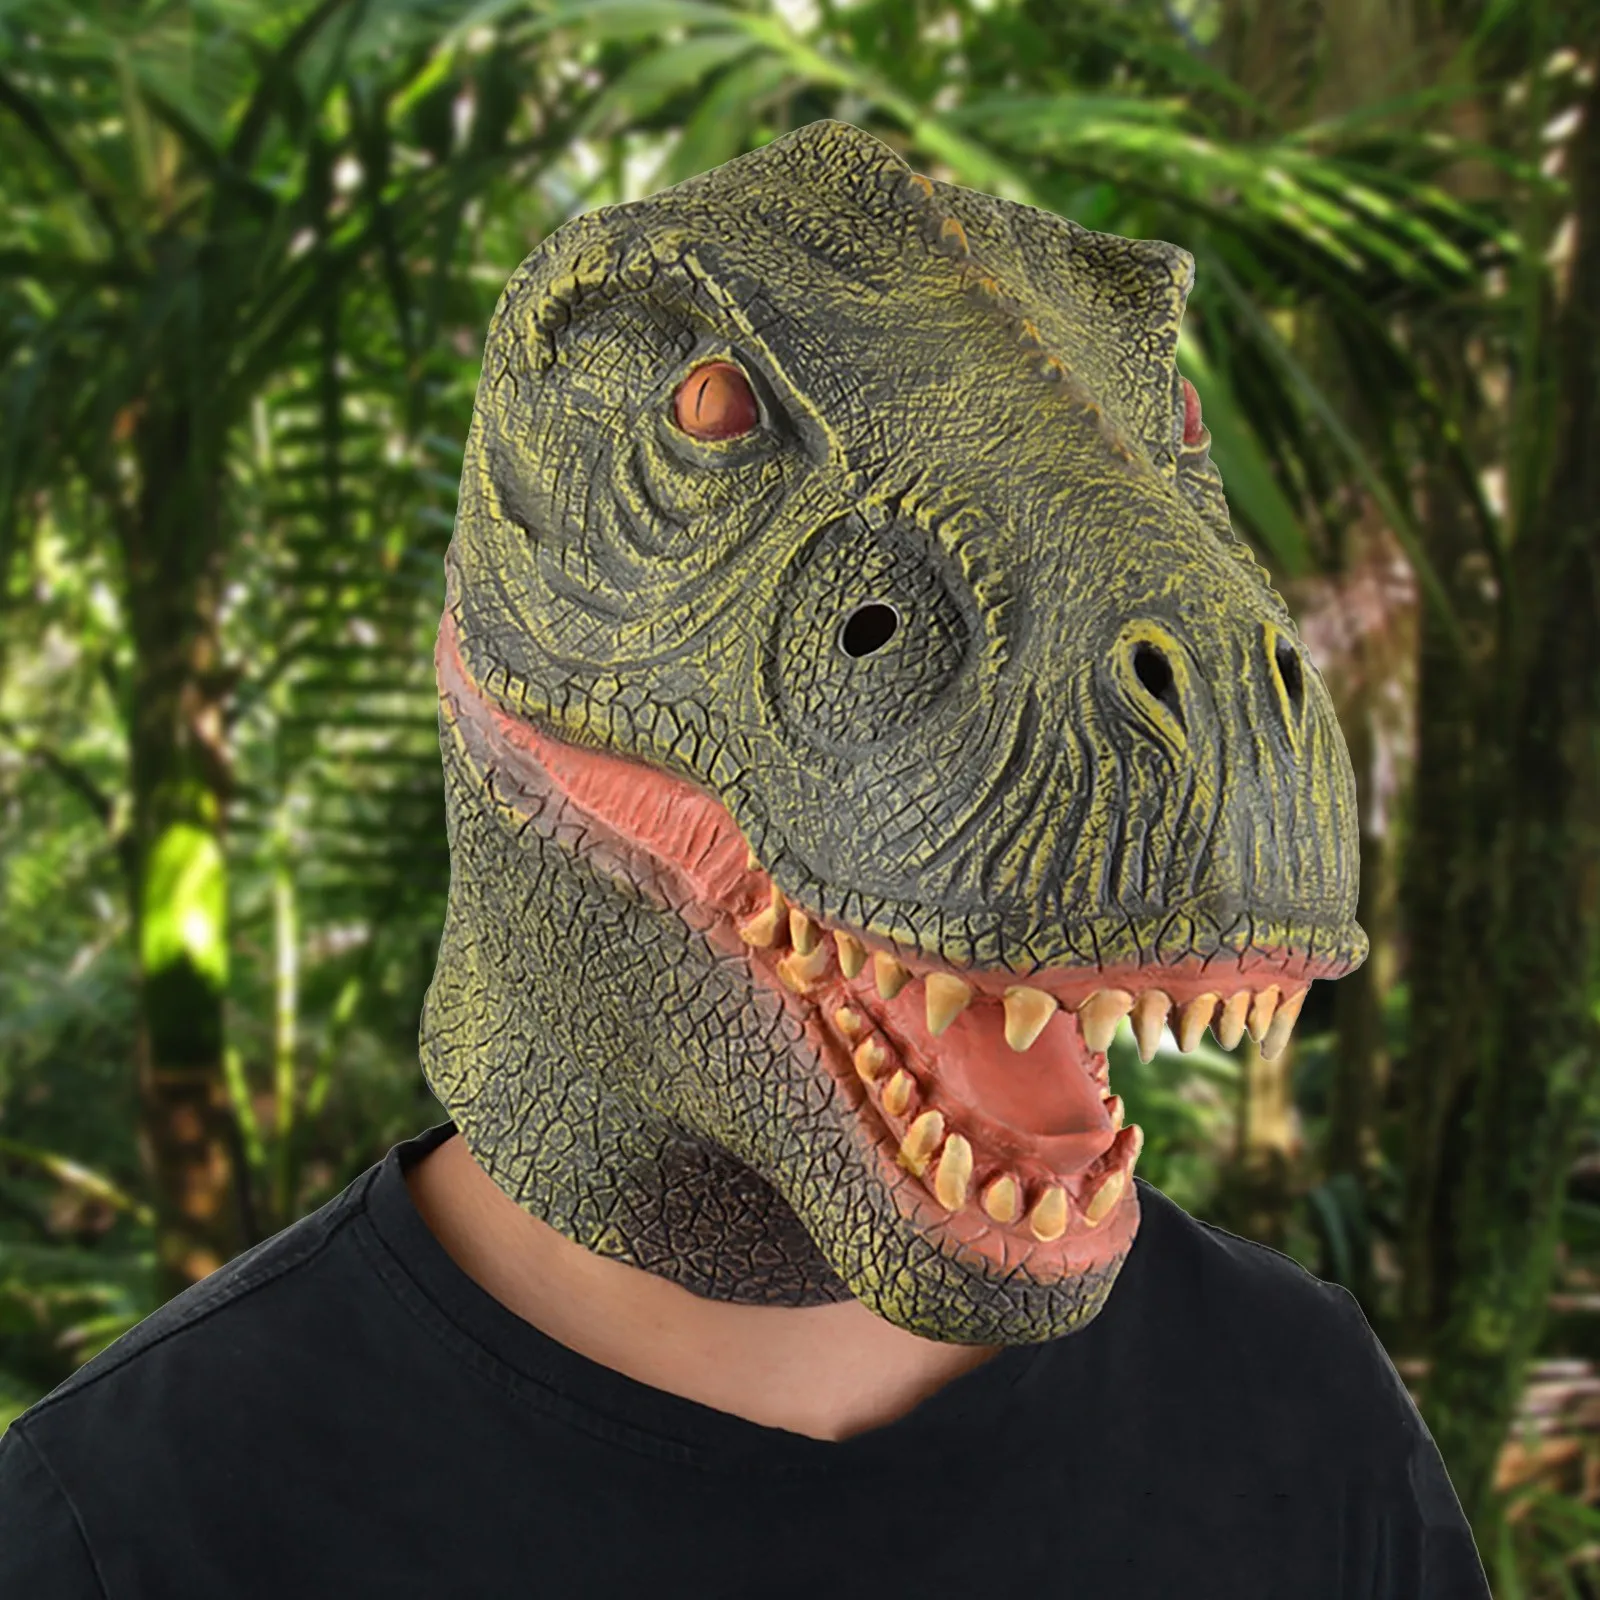 Dragon Mask New Movable Jaw Dino Moving Dinosaur Decor For Halloween Party Cosplay Decoration Funny Toy Gifts | Тематическая одежда